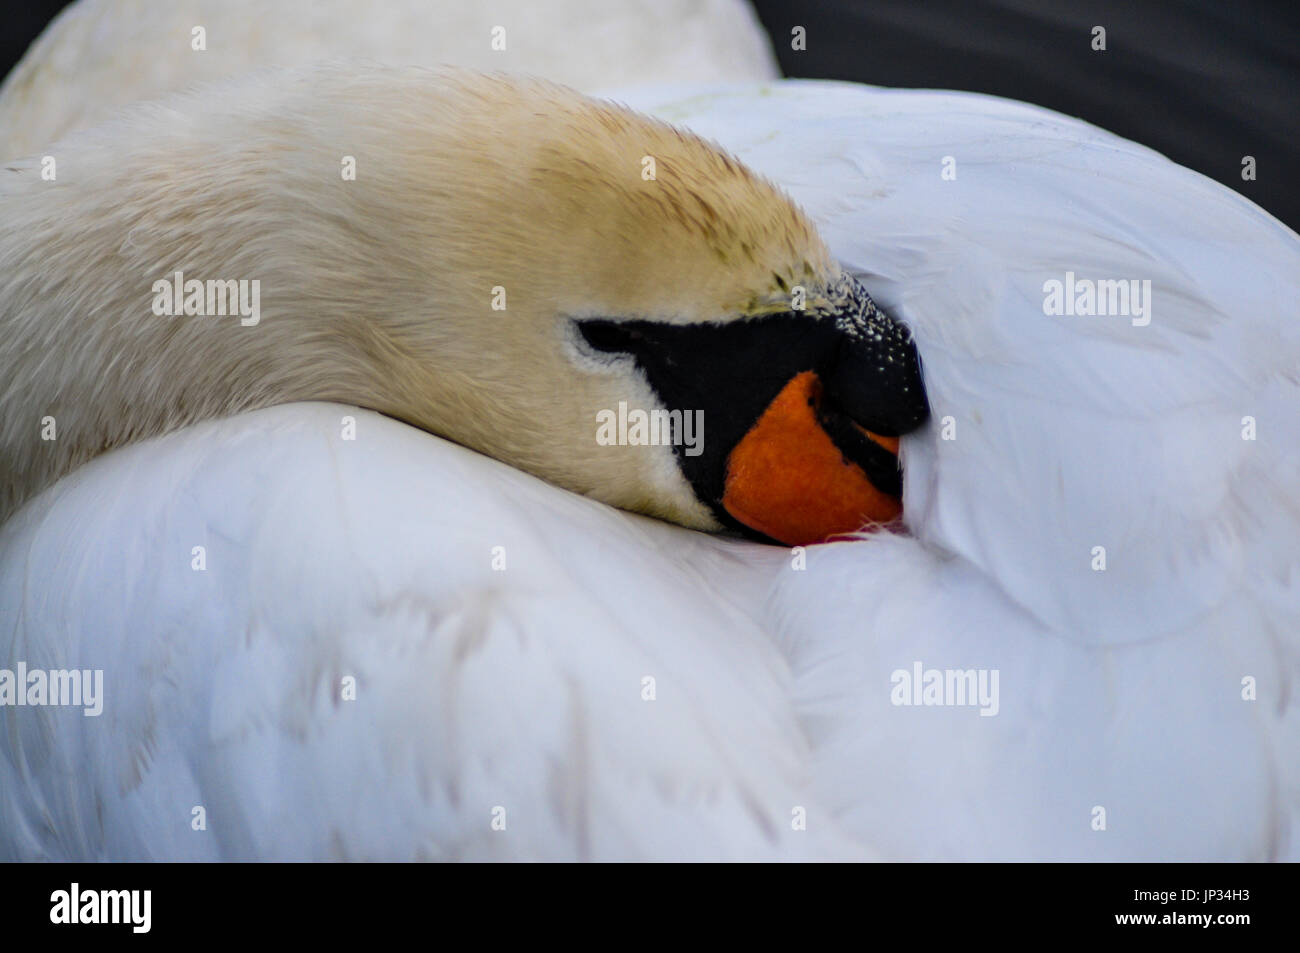 Cygne muet sleeping Banque D'Images